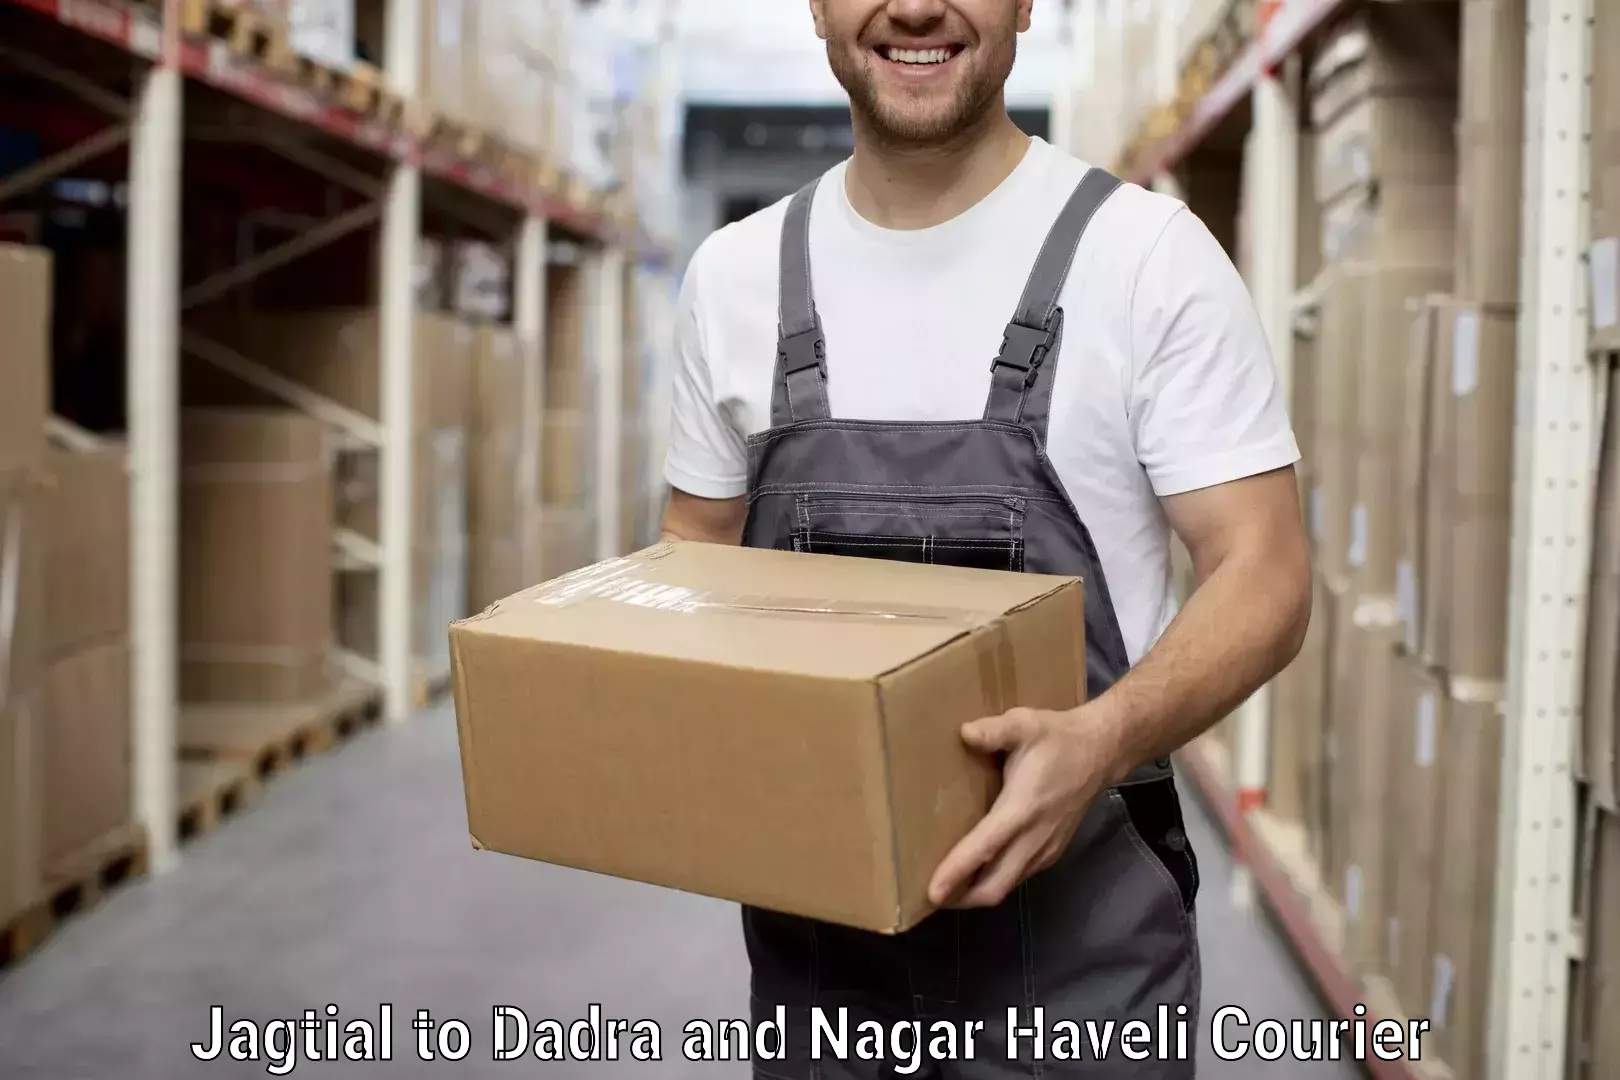 Furniture delivery service Jagtial to Dadra and Nagar Haveli